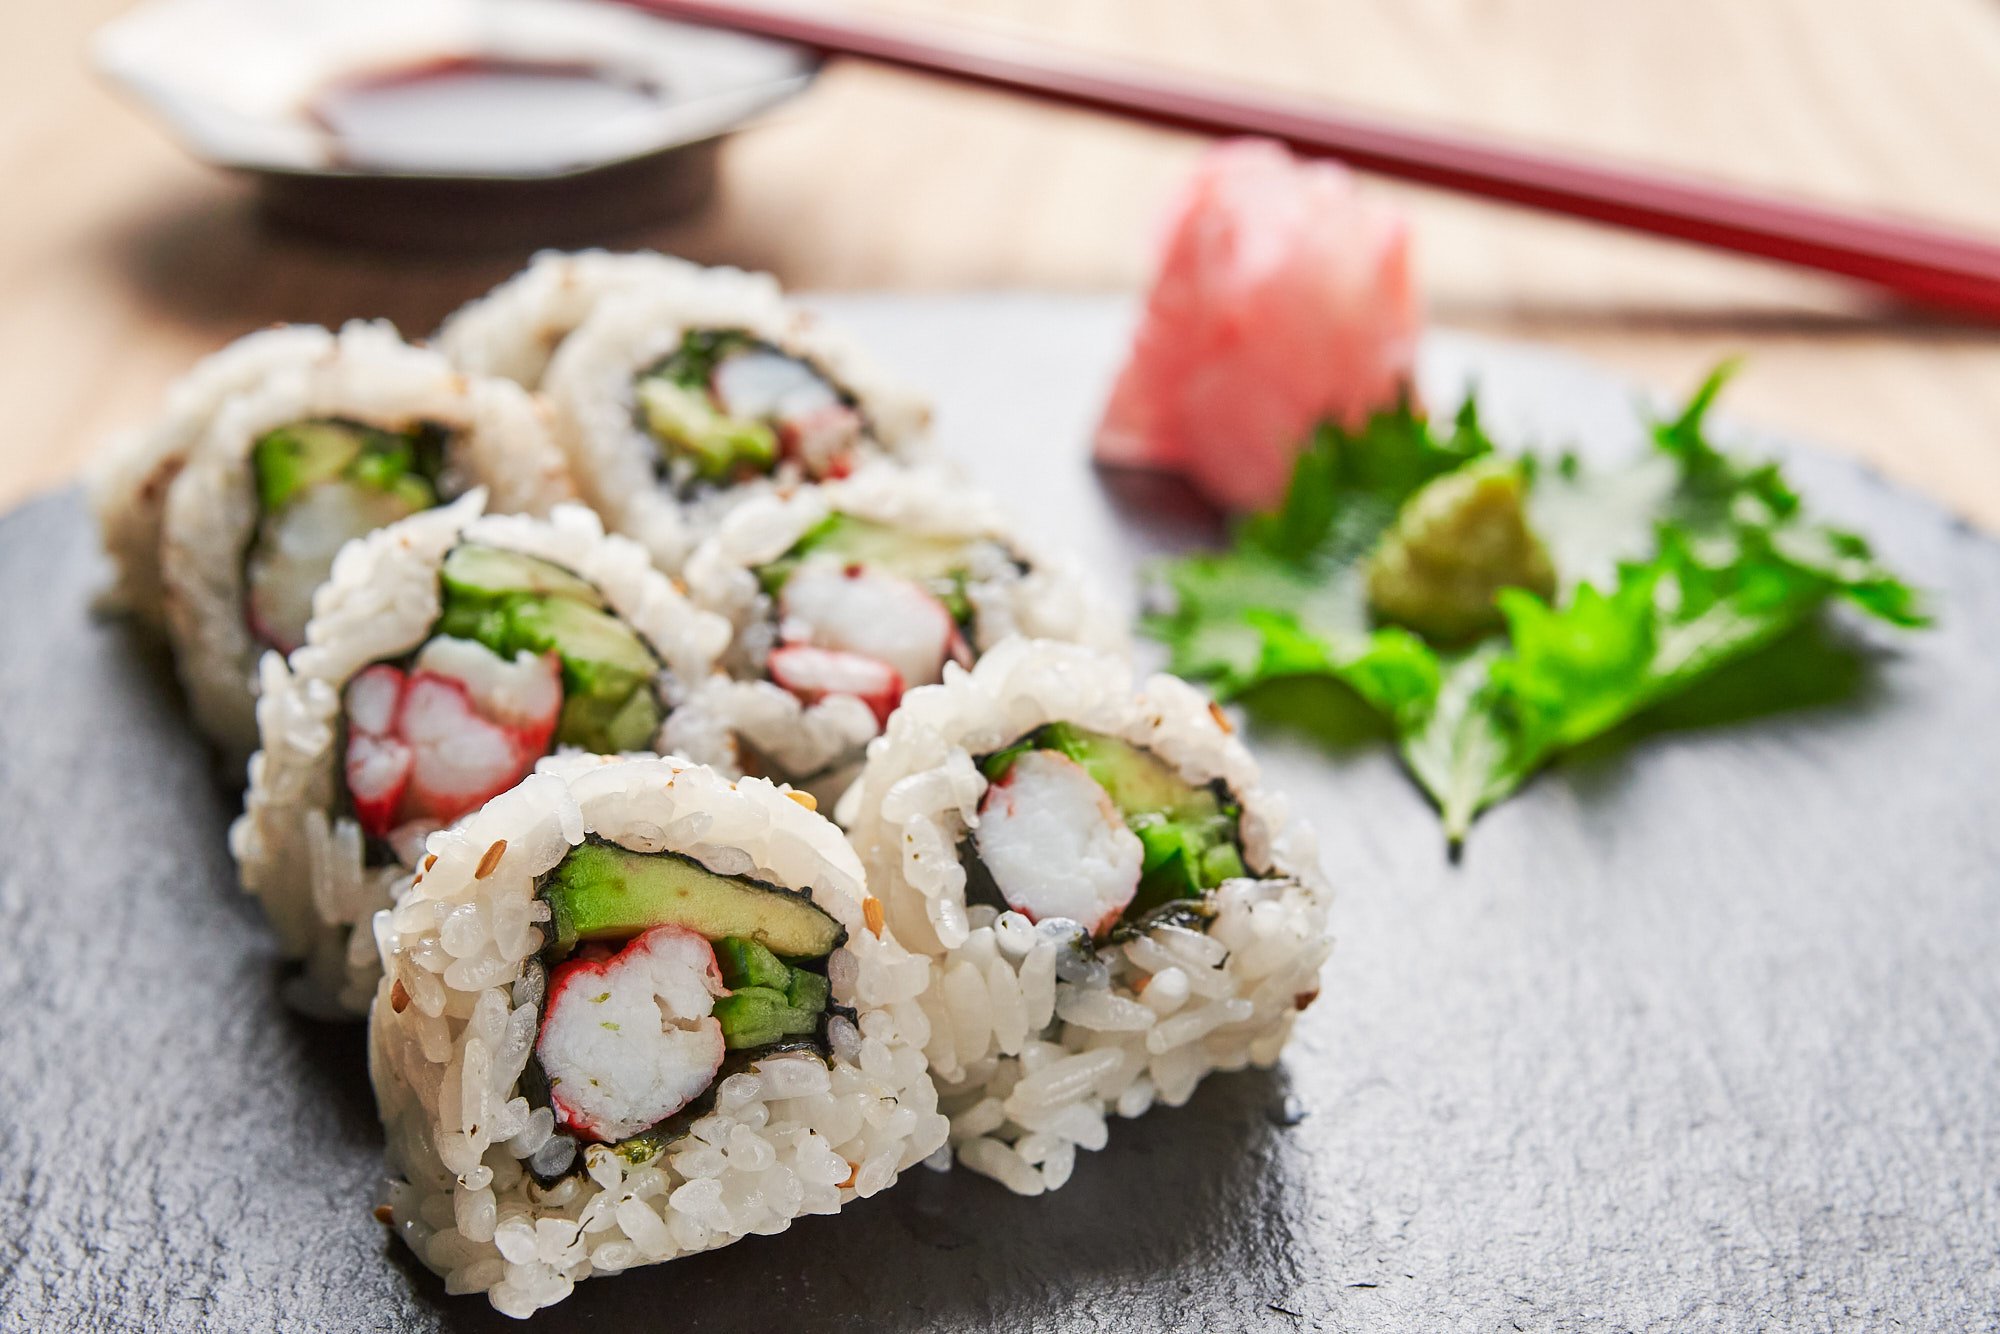 California rolls stuffed with avocado, king crab, and cucumber.